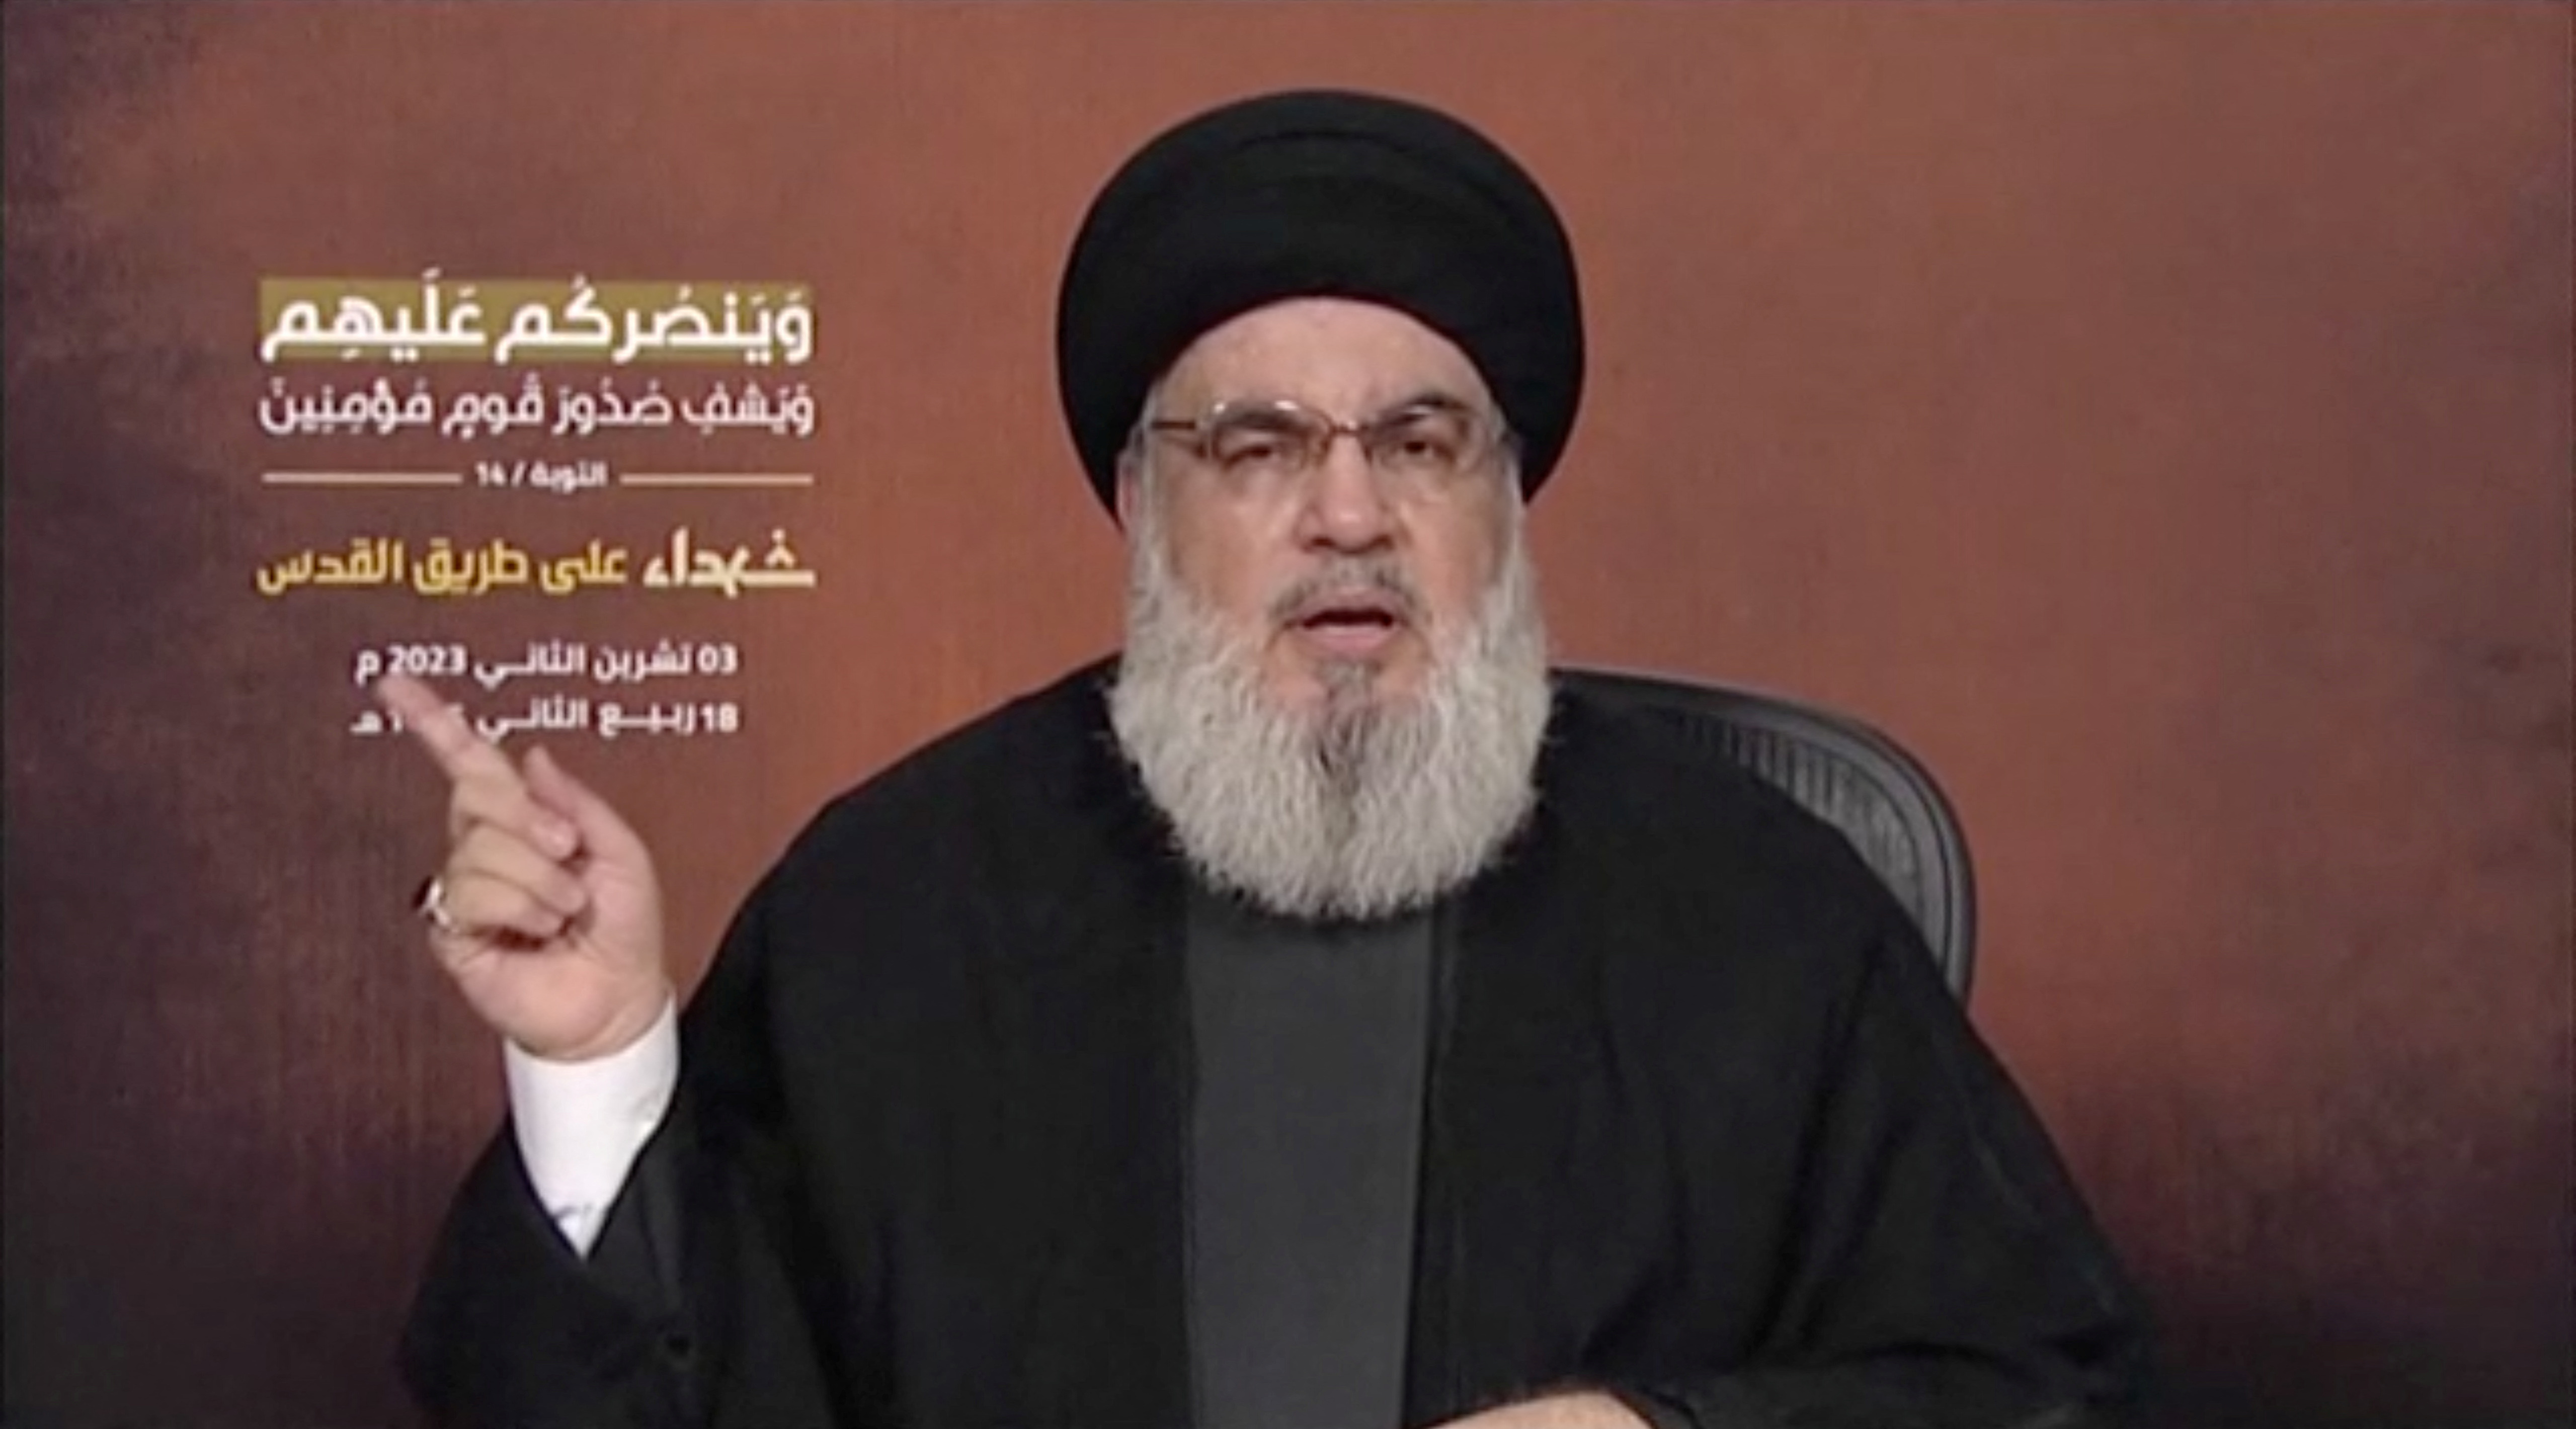 Hezbollah leader Nasrallah delivers his first address since October conflict between Palestinian group Hamas and Israel